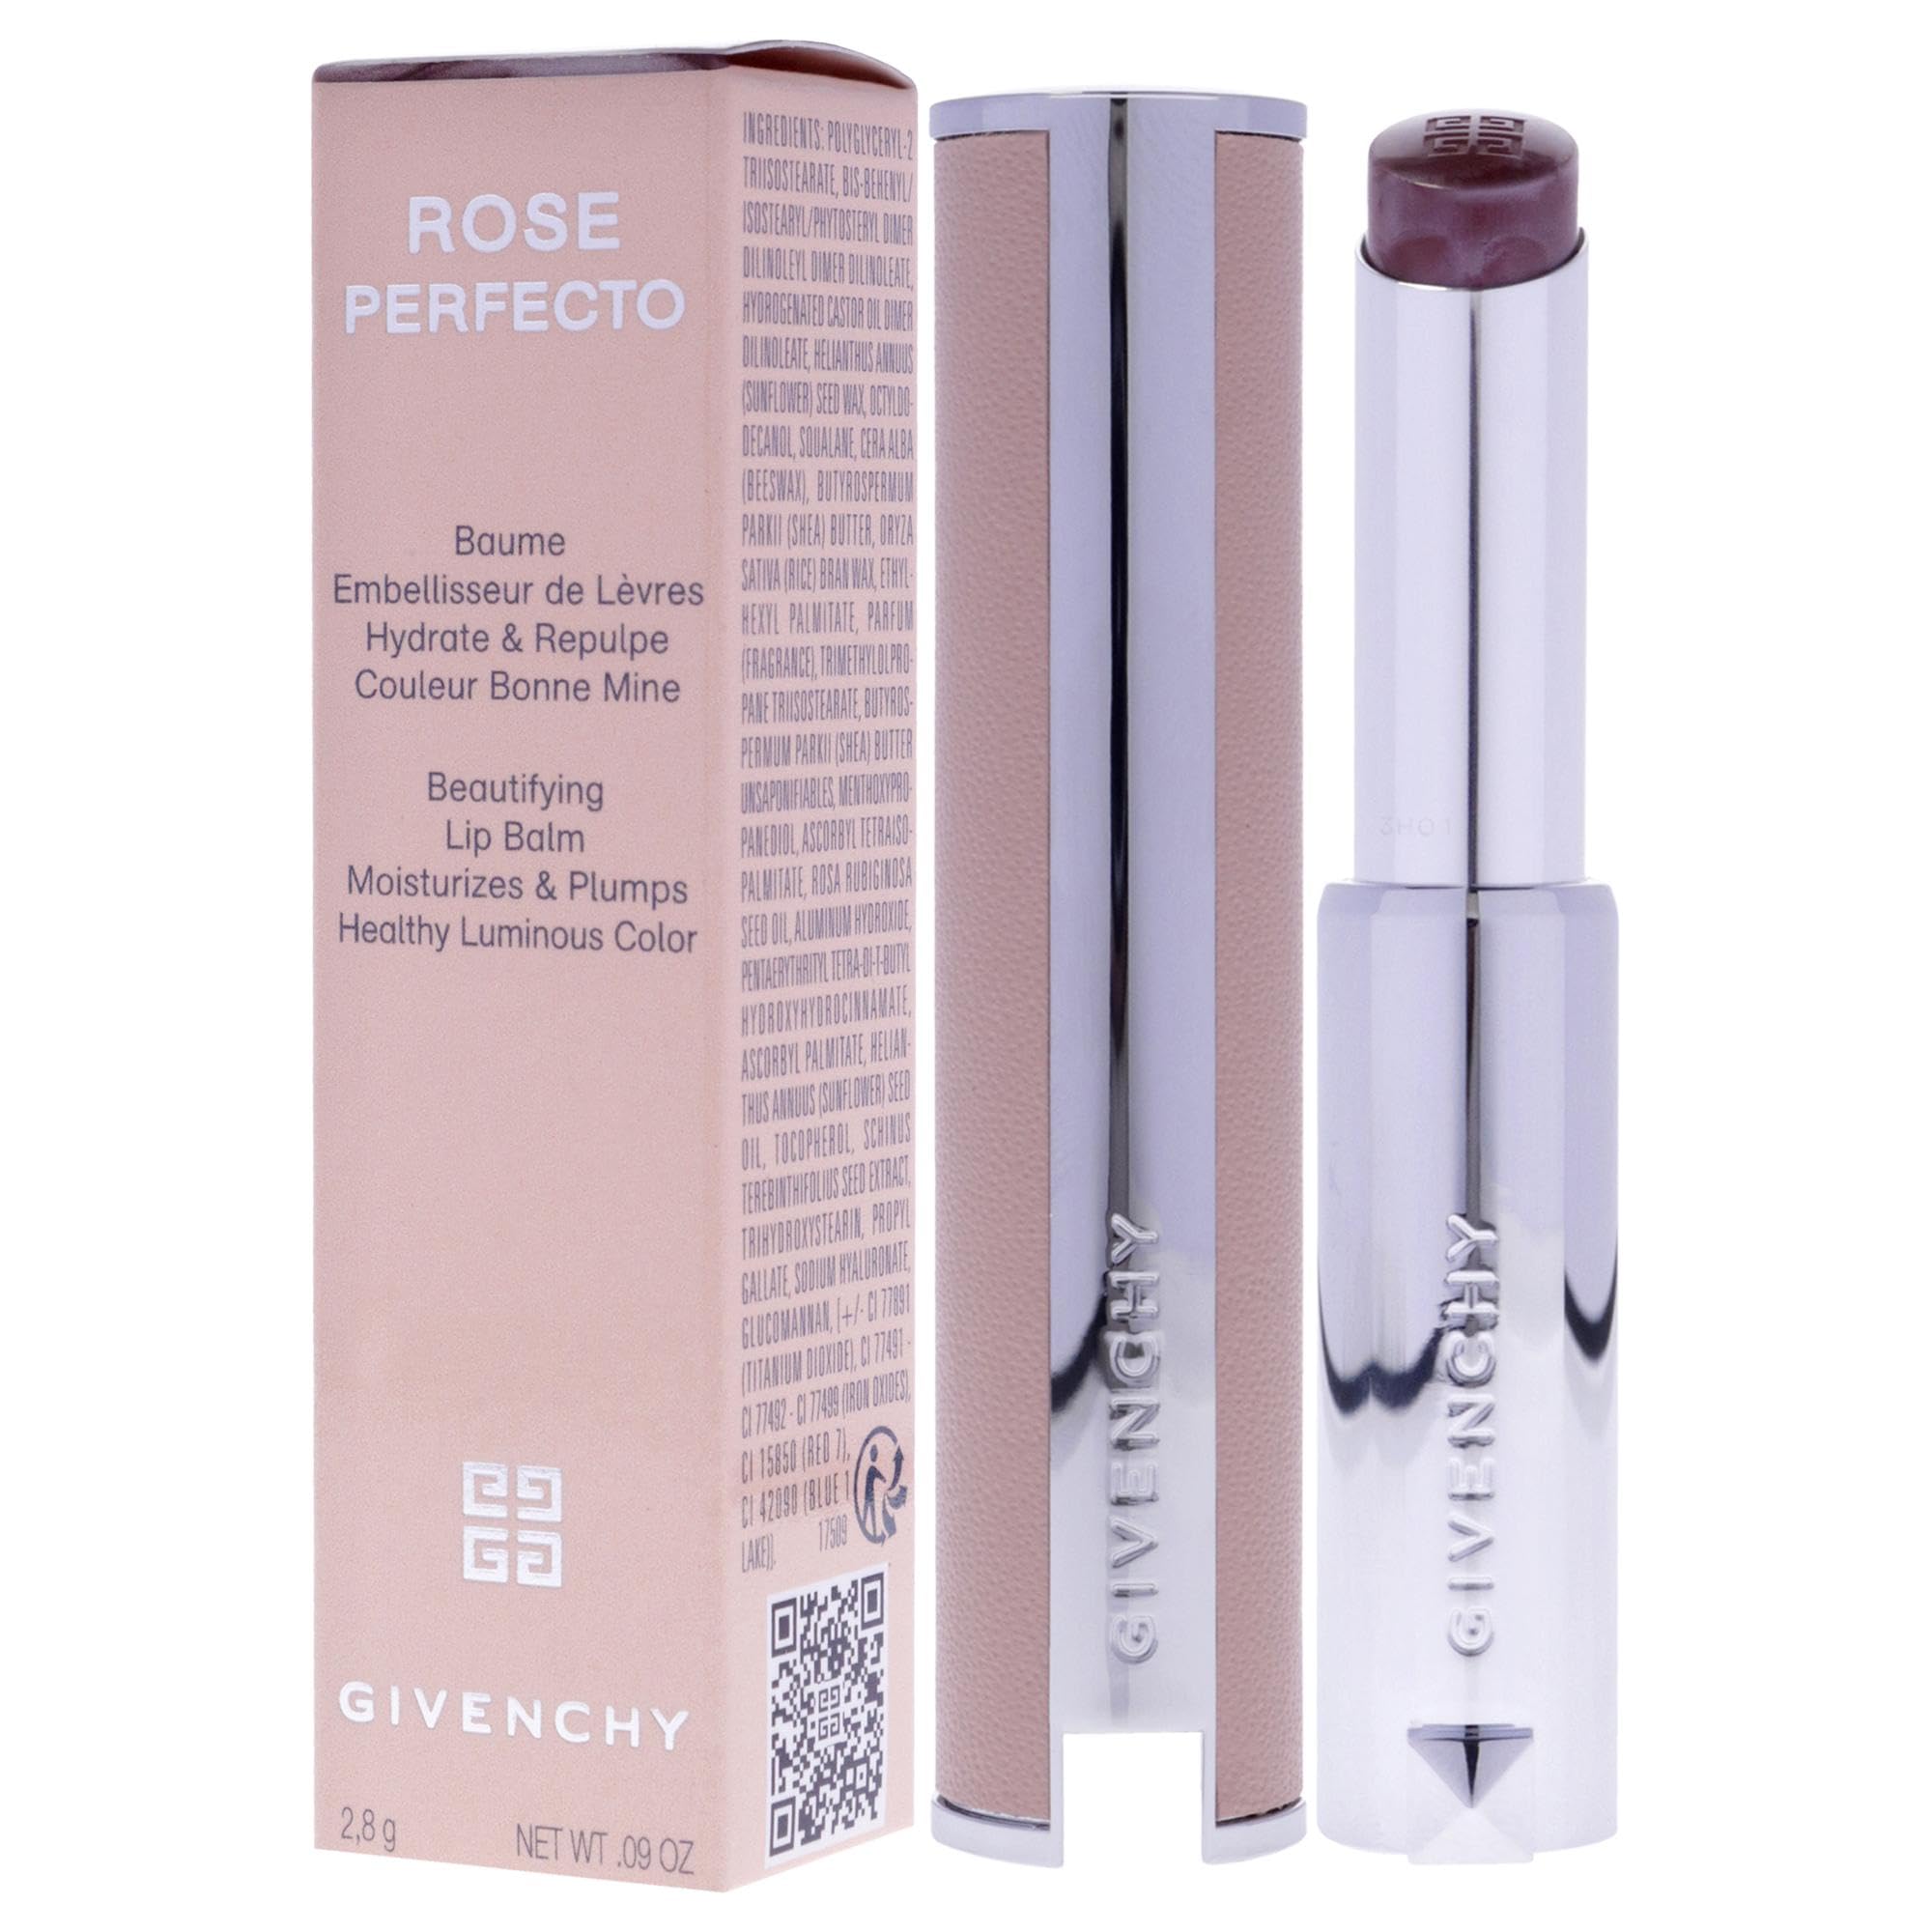 Rose Perfecto Plumping Lip Balm - N117 Chilling Brown by Givenchy for Women - 0.09 oz Lip Balm